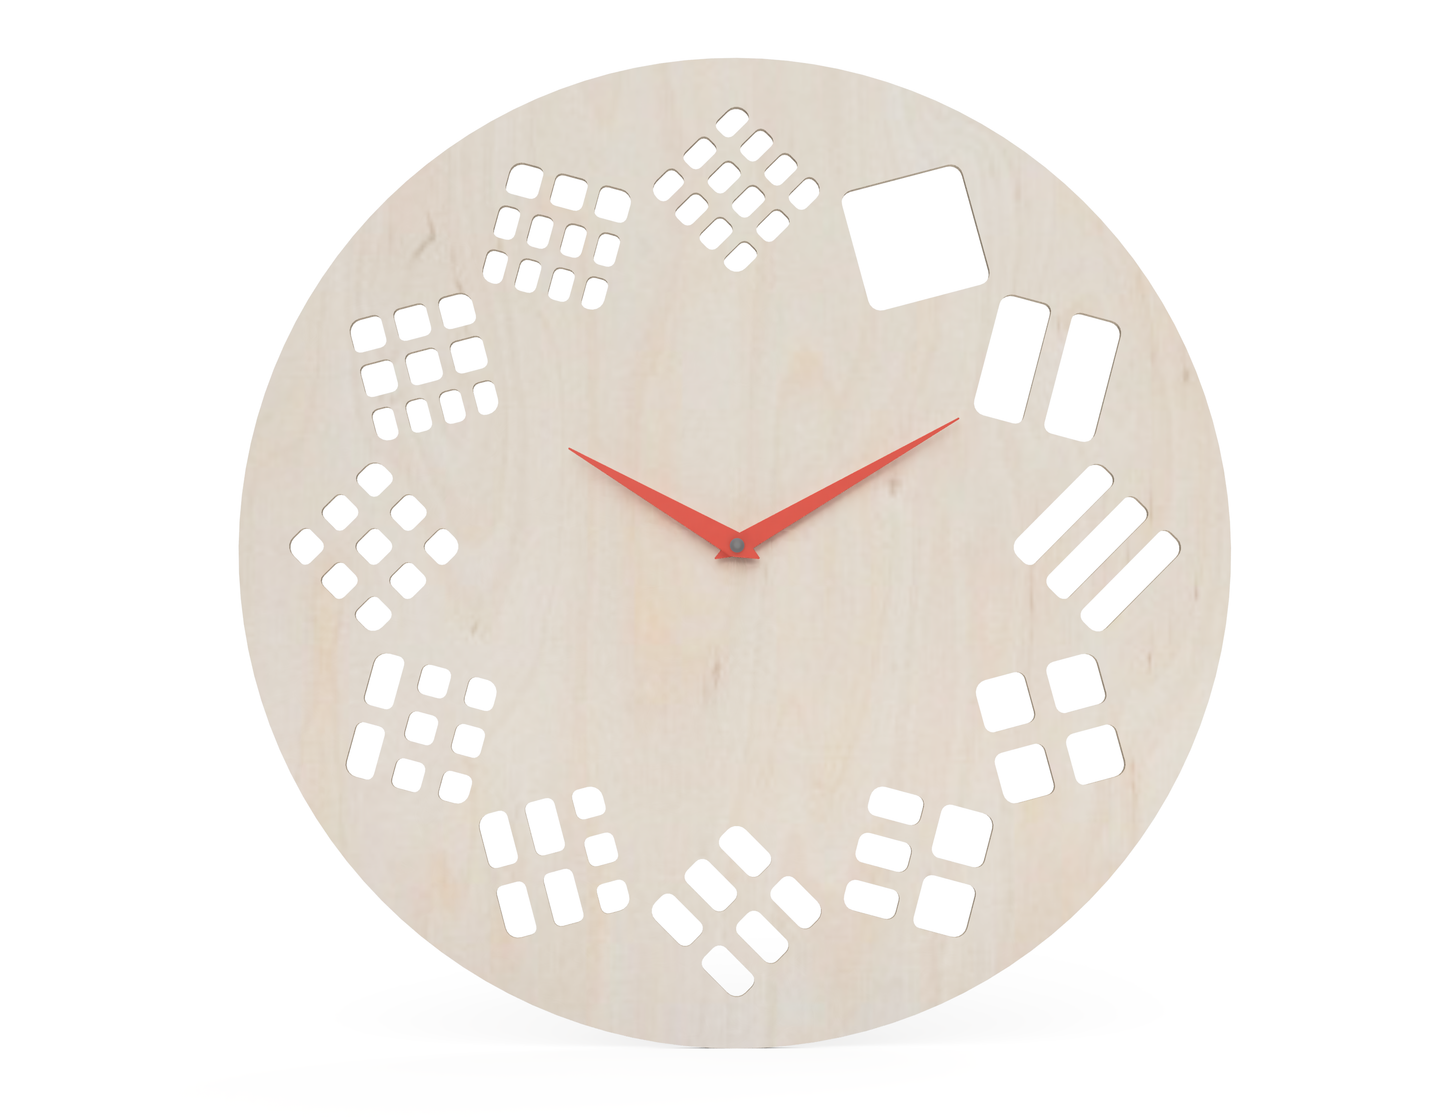 Clock Face "Squares" DXF Files